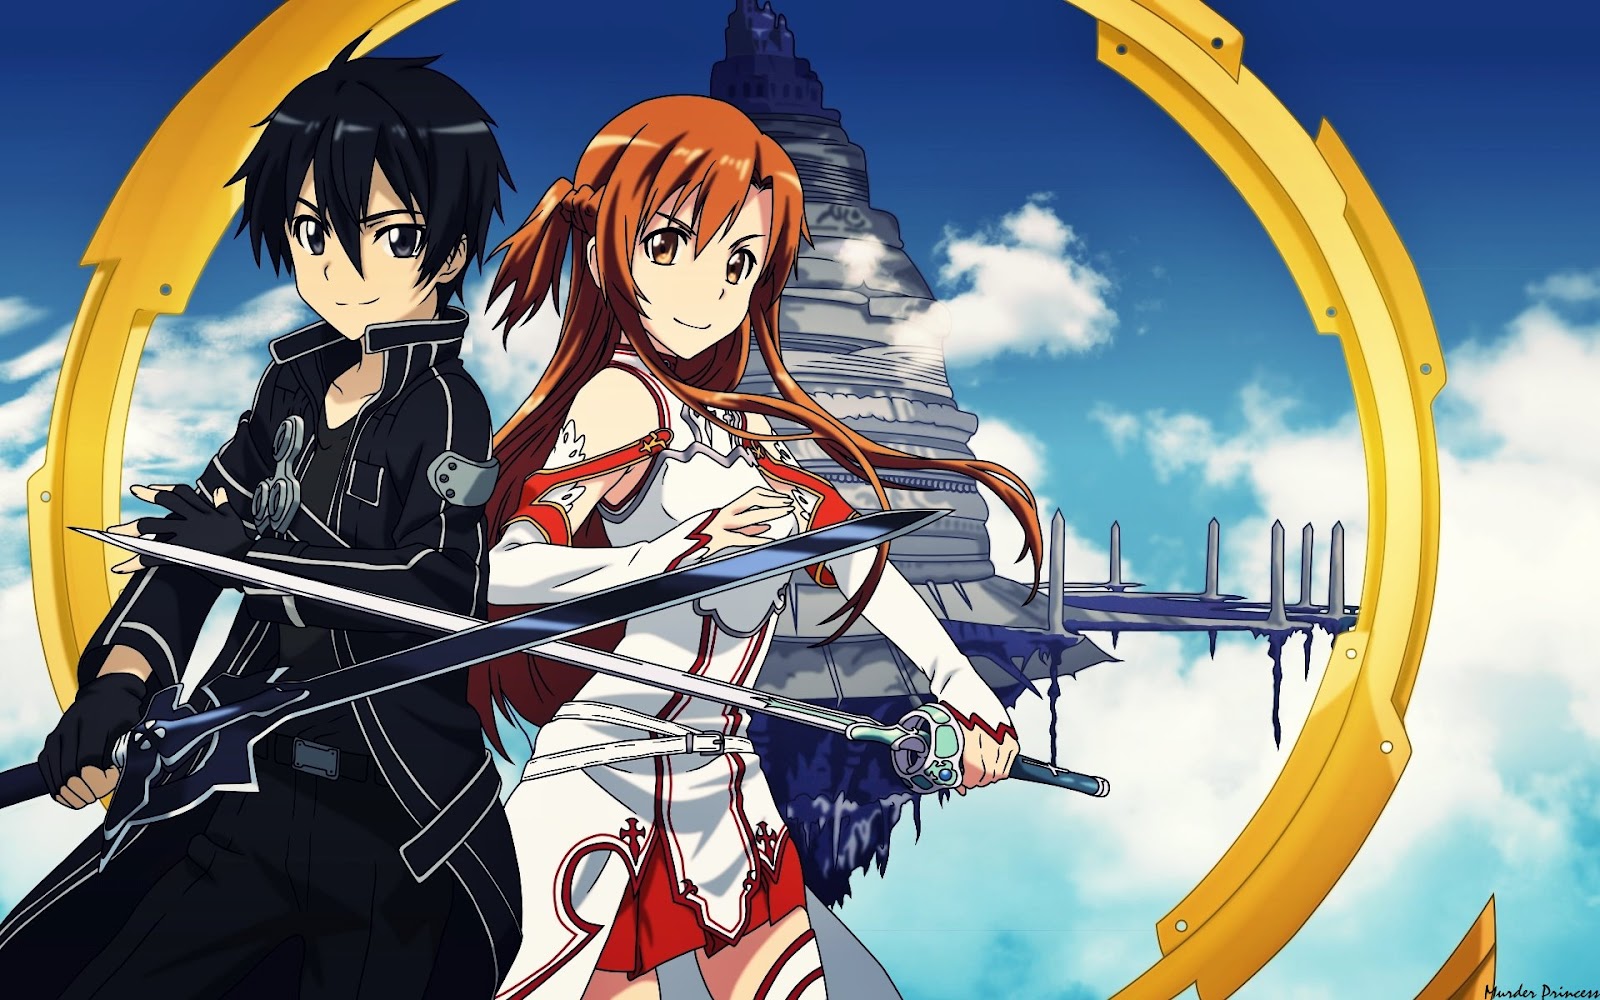 When Will Season 5 of Sword Art Online Be Available?